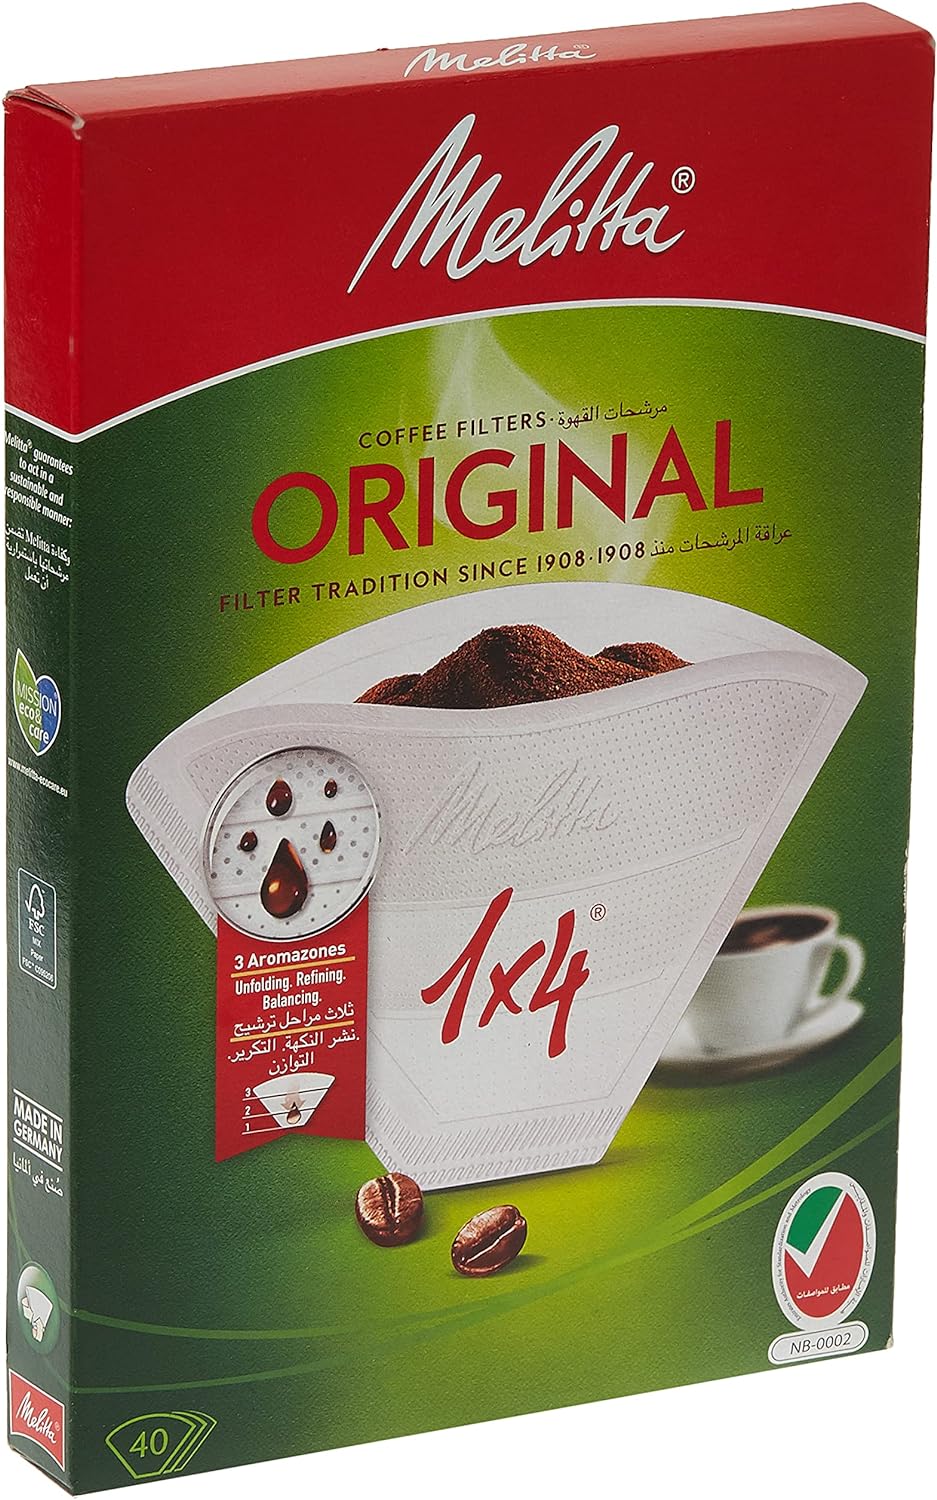 Melitta Original 1 x 4 Coffee Filters - Pack of 40 Filters, White